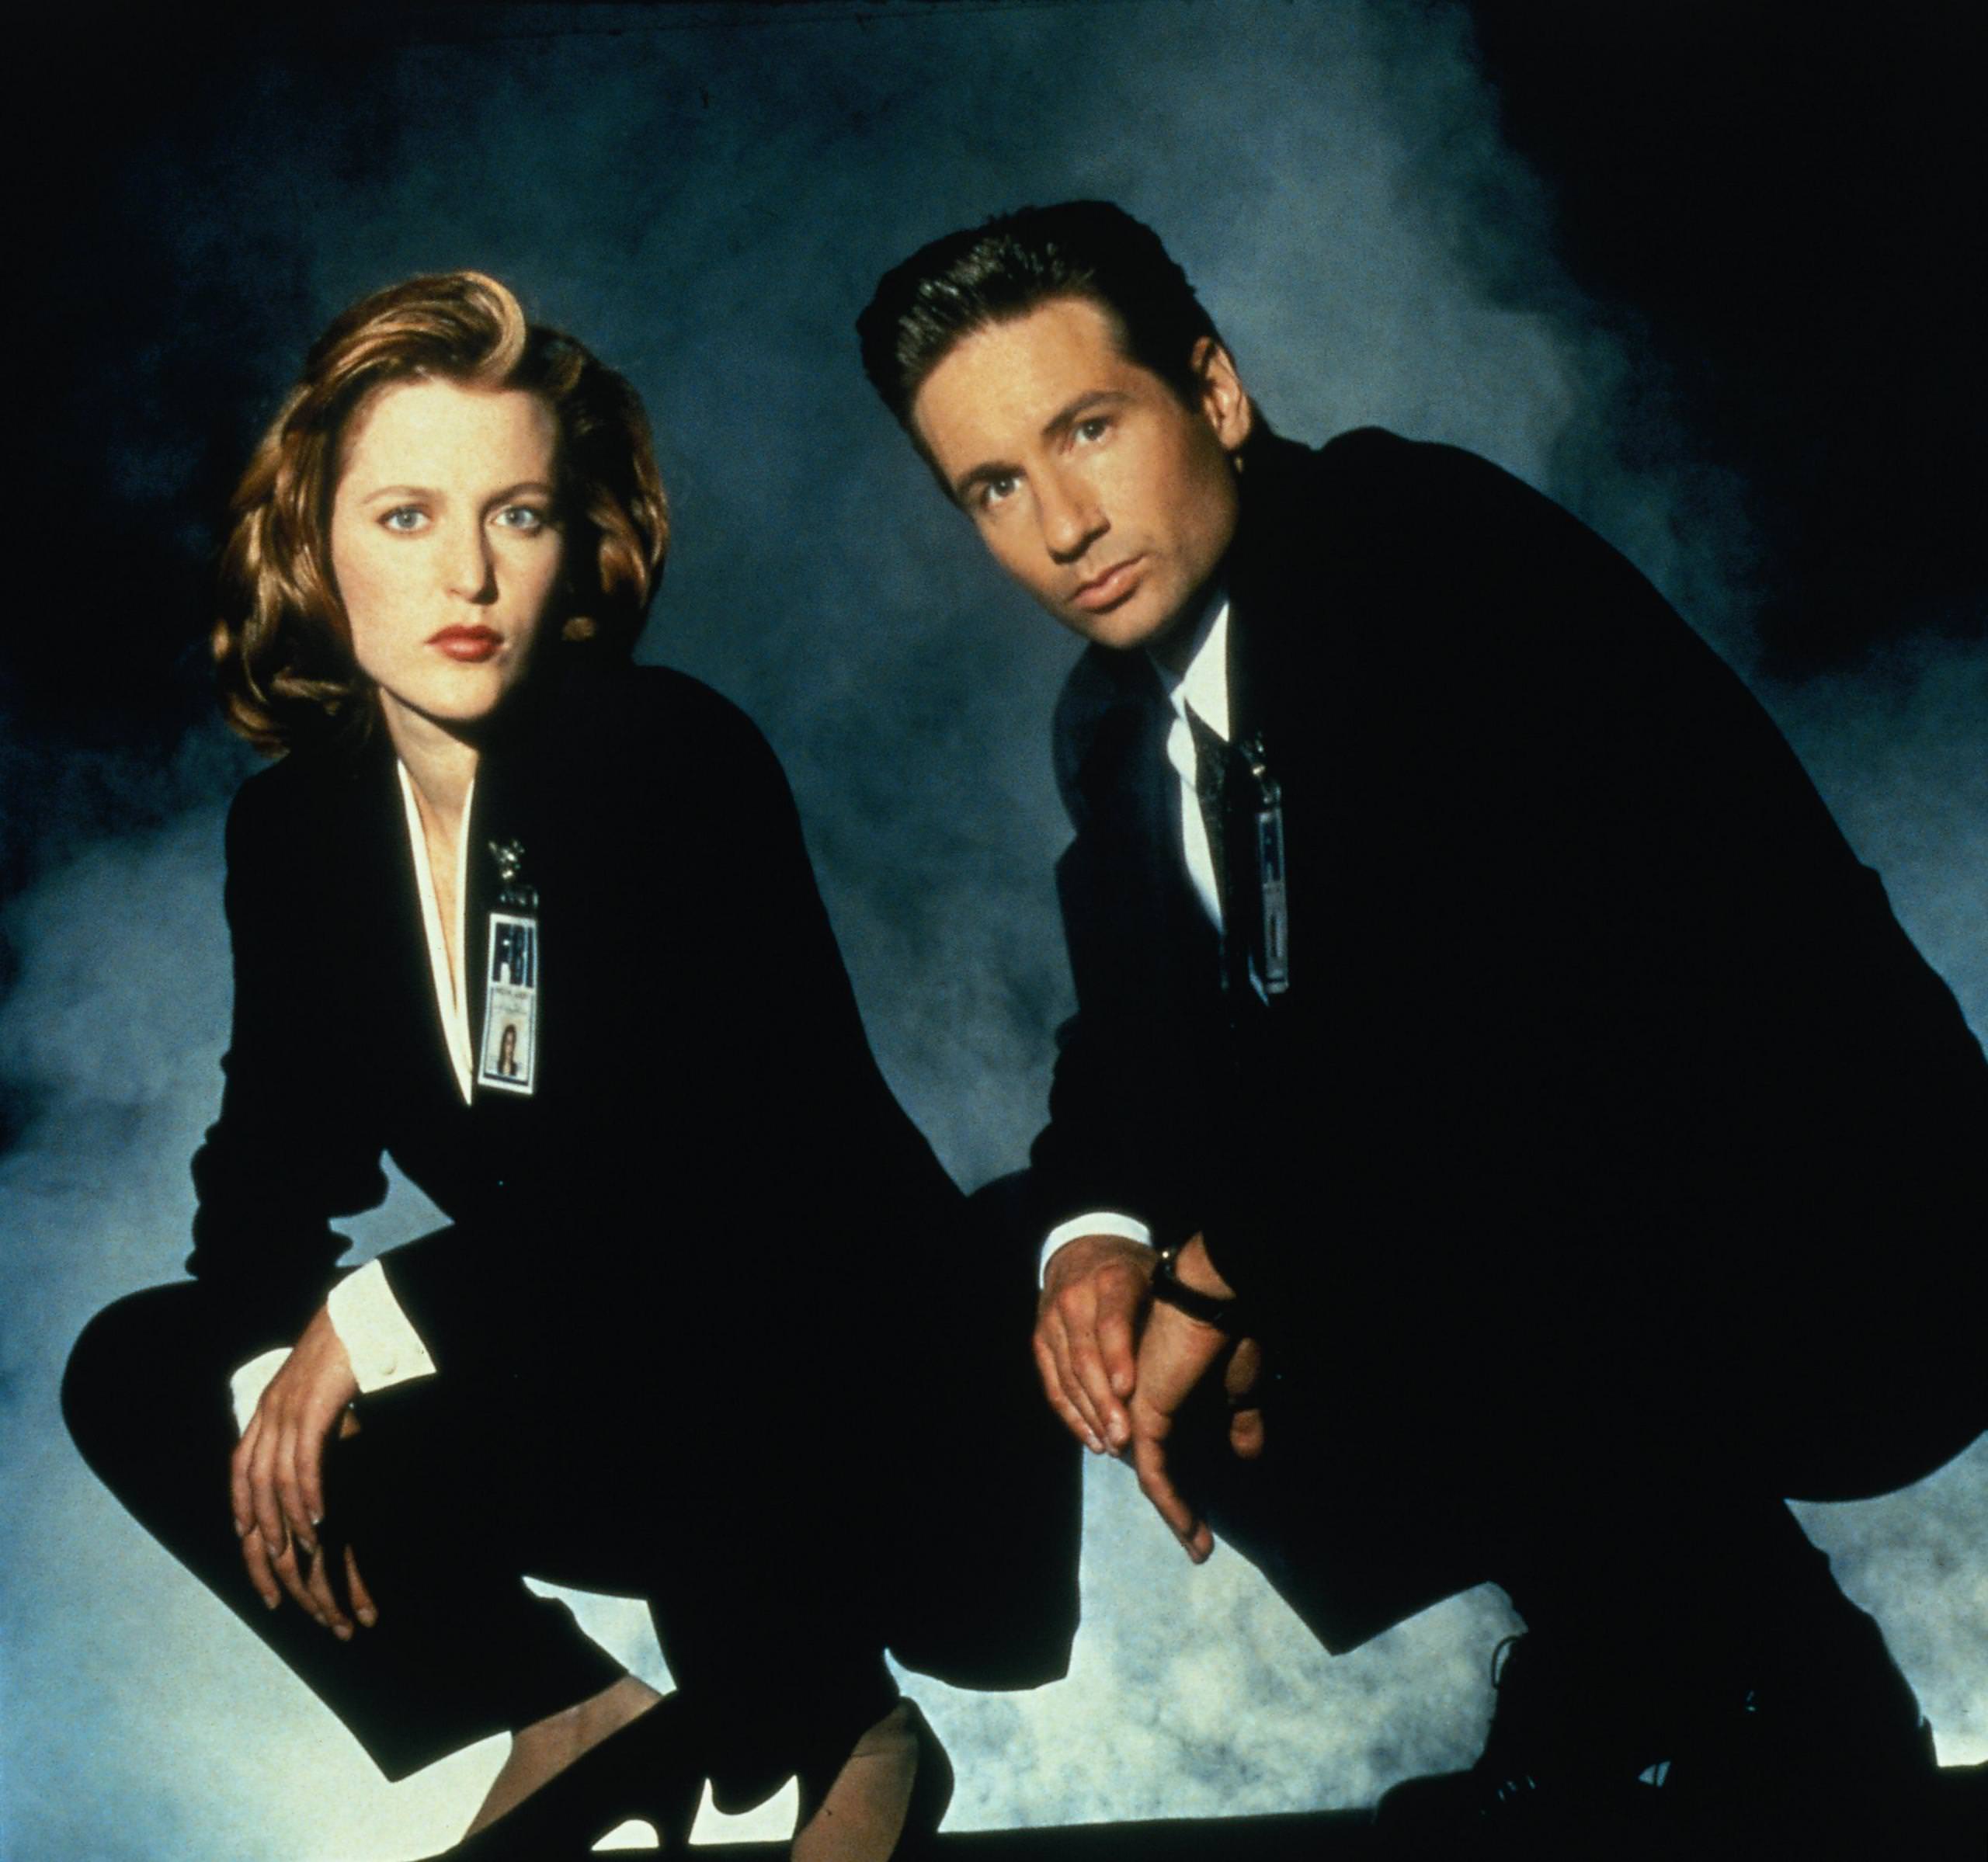 15 Scariest X-Files Episodes – They’ll Scare the Pants Off You